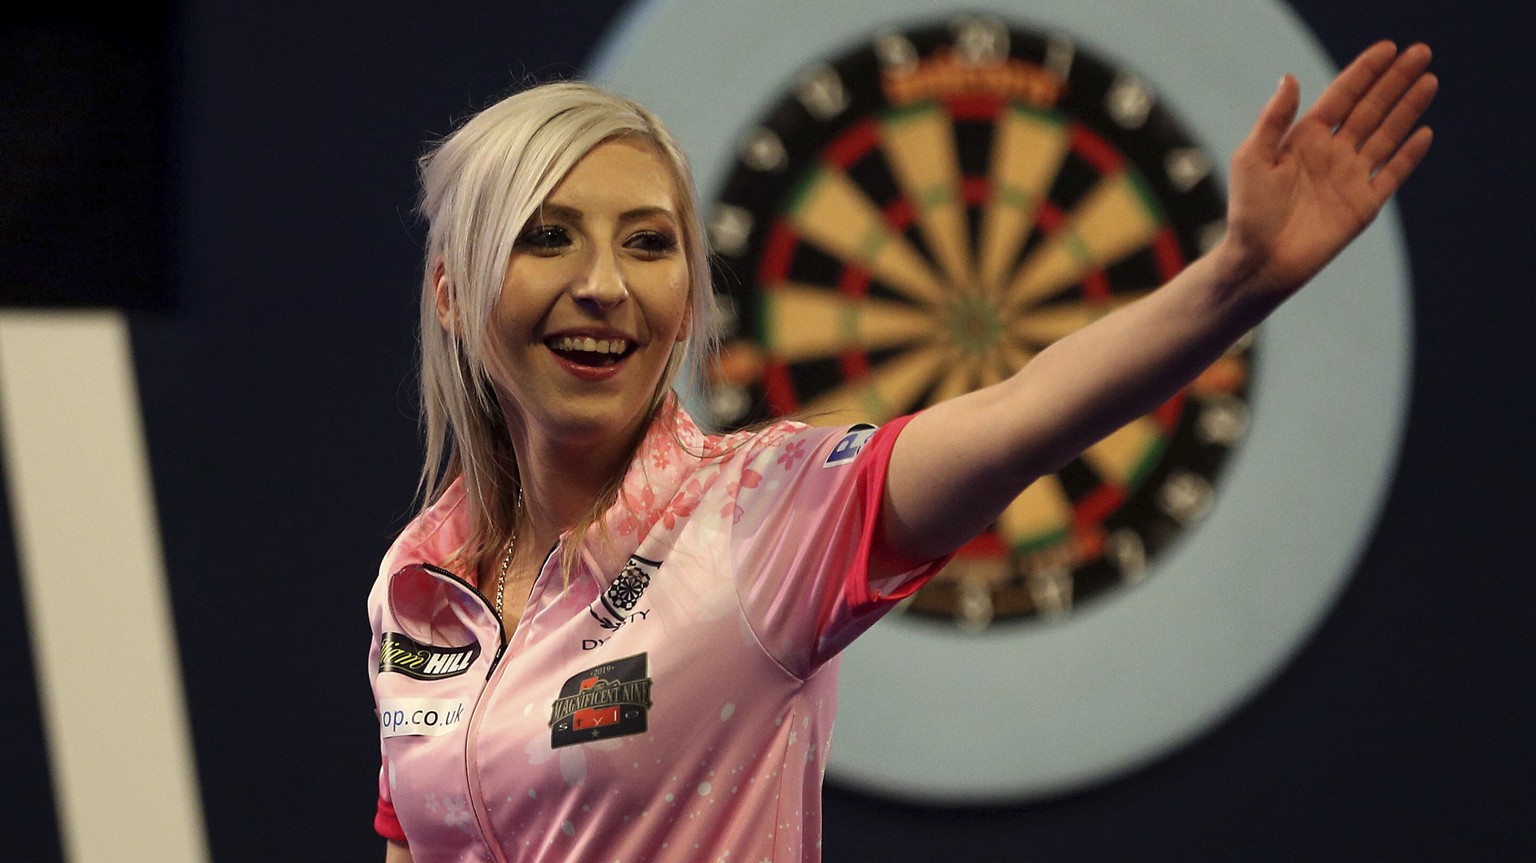 Fallon Sherrock celebrating after becoming the first women to win a game in the PDC Darts World Championship at Alexandra Palace, London, Tuesday Dec. 17, 2019. Sherrock become the first female player ...